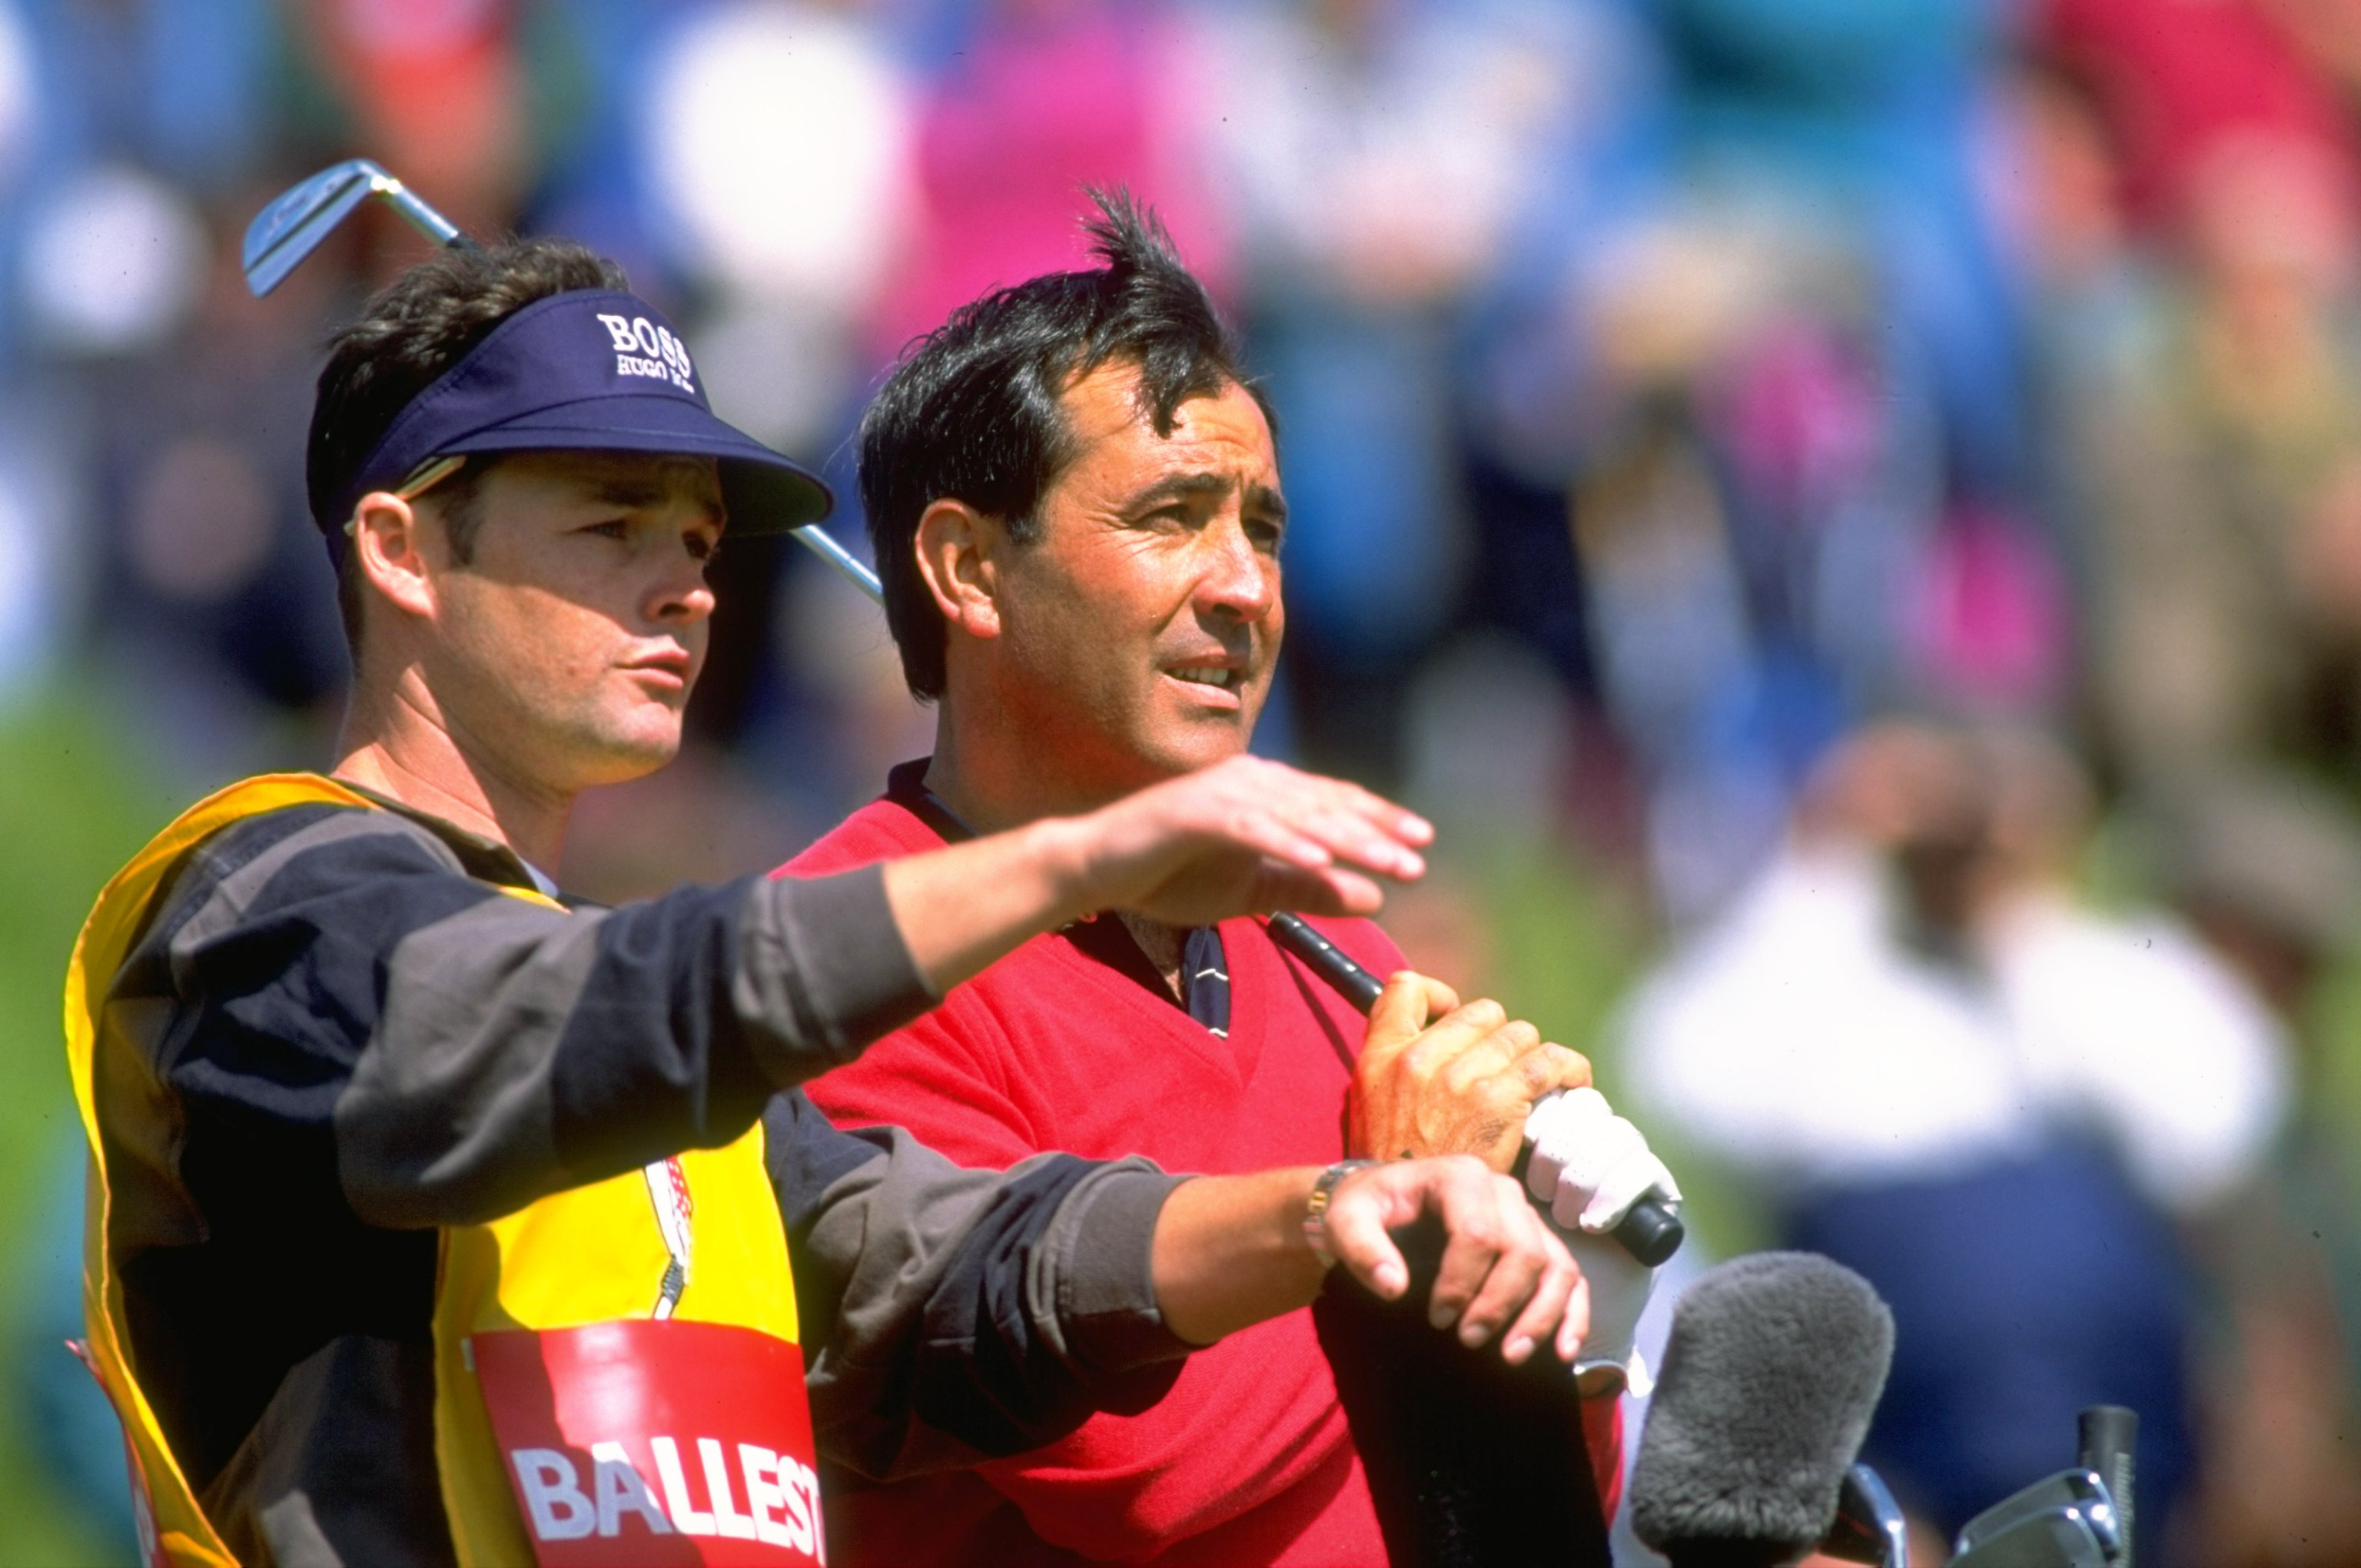 Foster was Seve's bagman from 1990 to 1995 (Photo: Getty Images)